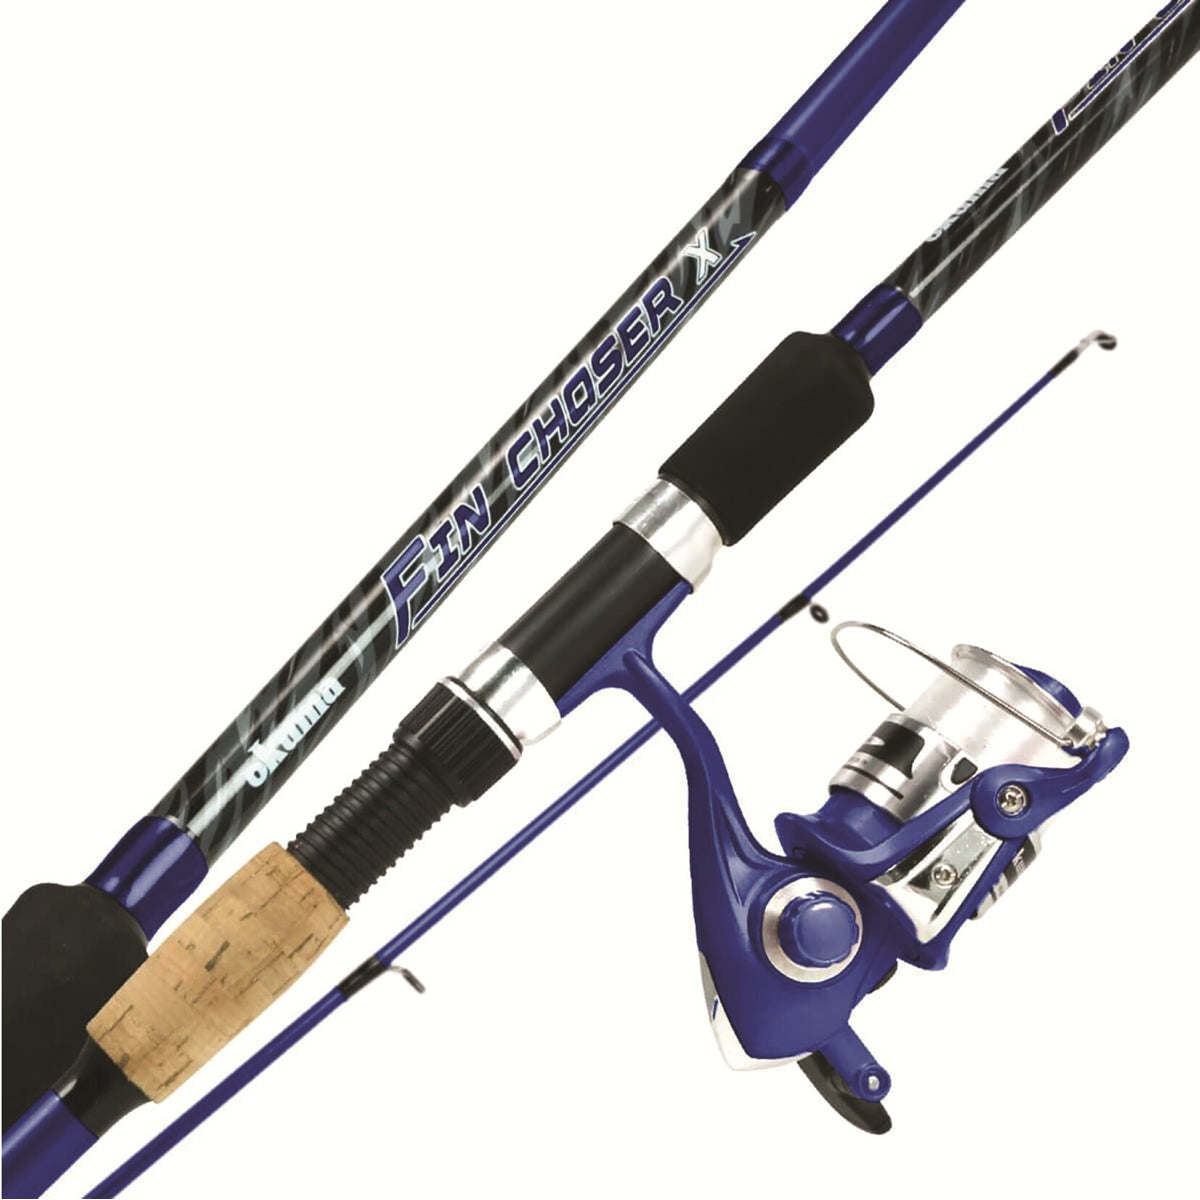 Photo of Okuma Fin Chaser Combo for sale at United Tackle Shops.